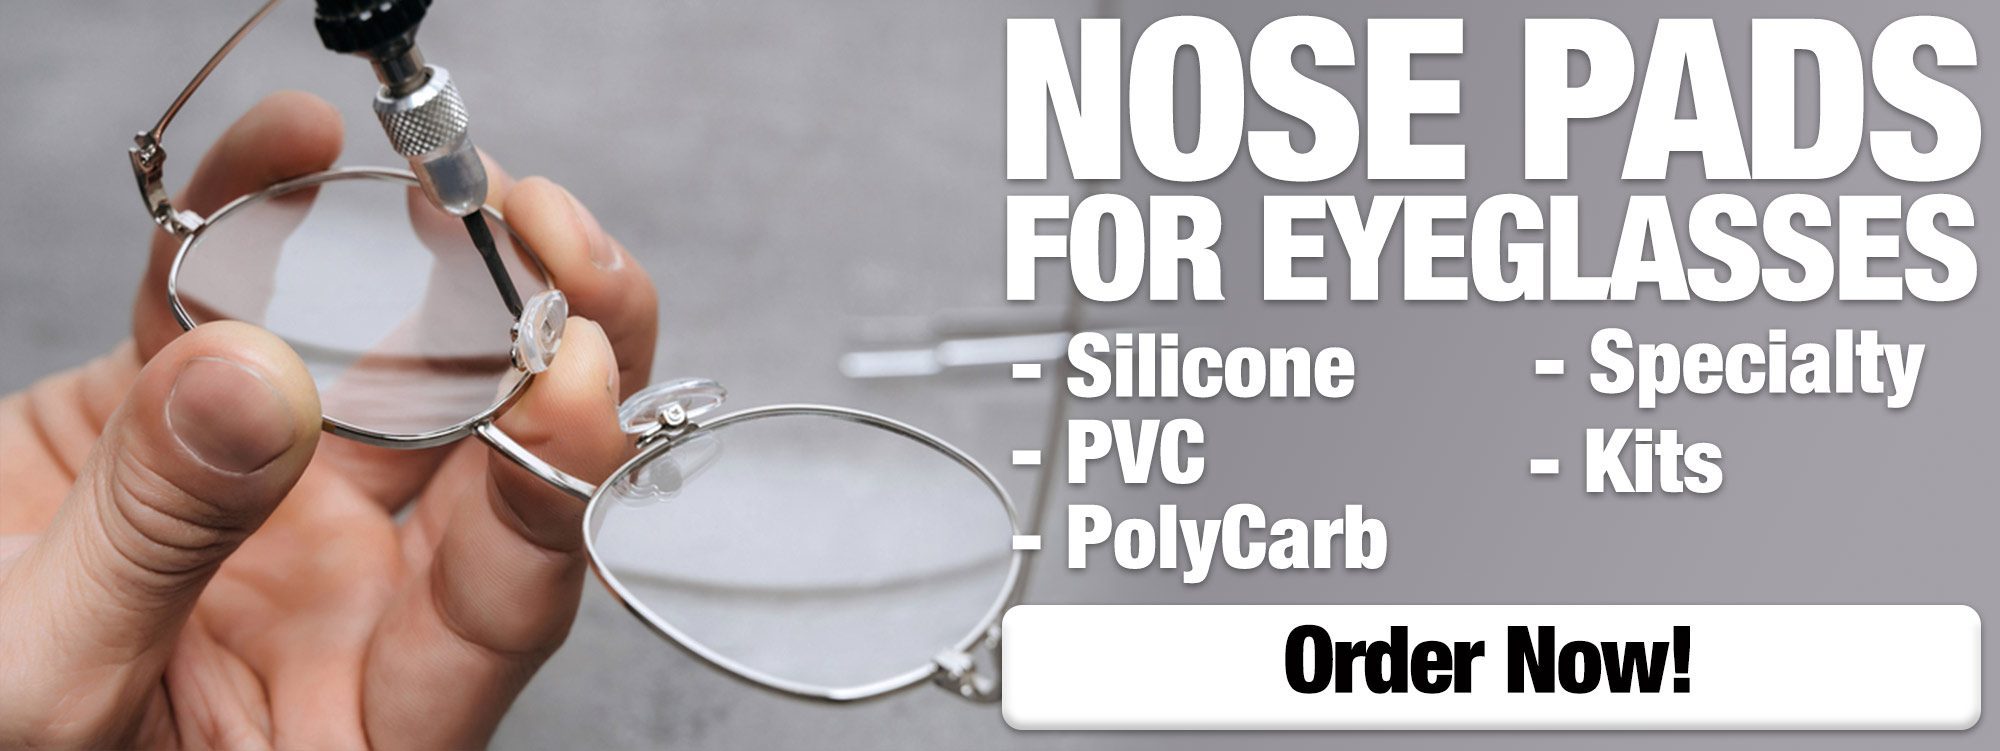 Nose-Pads-for-Eyeglasses-Optical-Products-Online